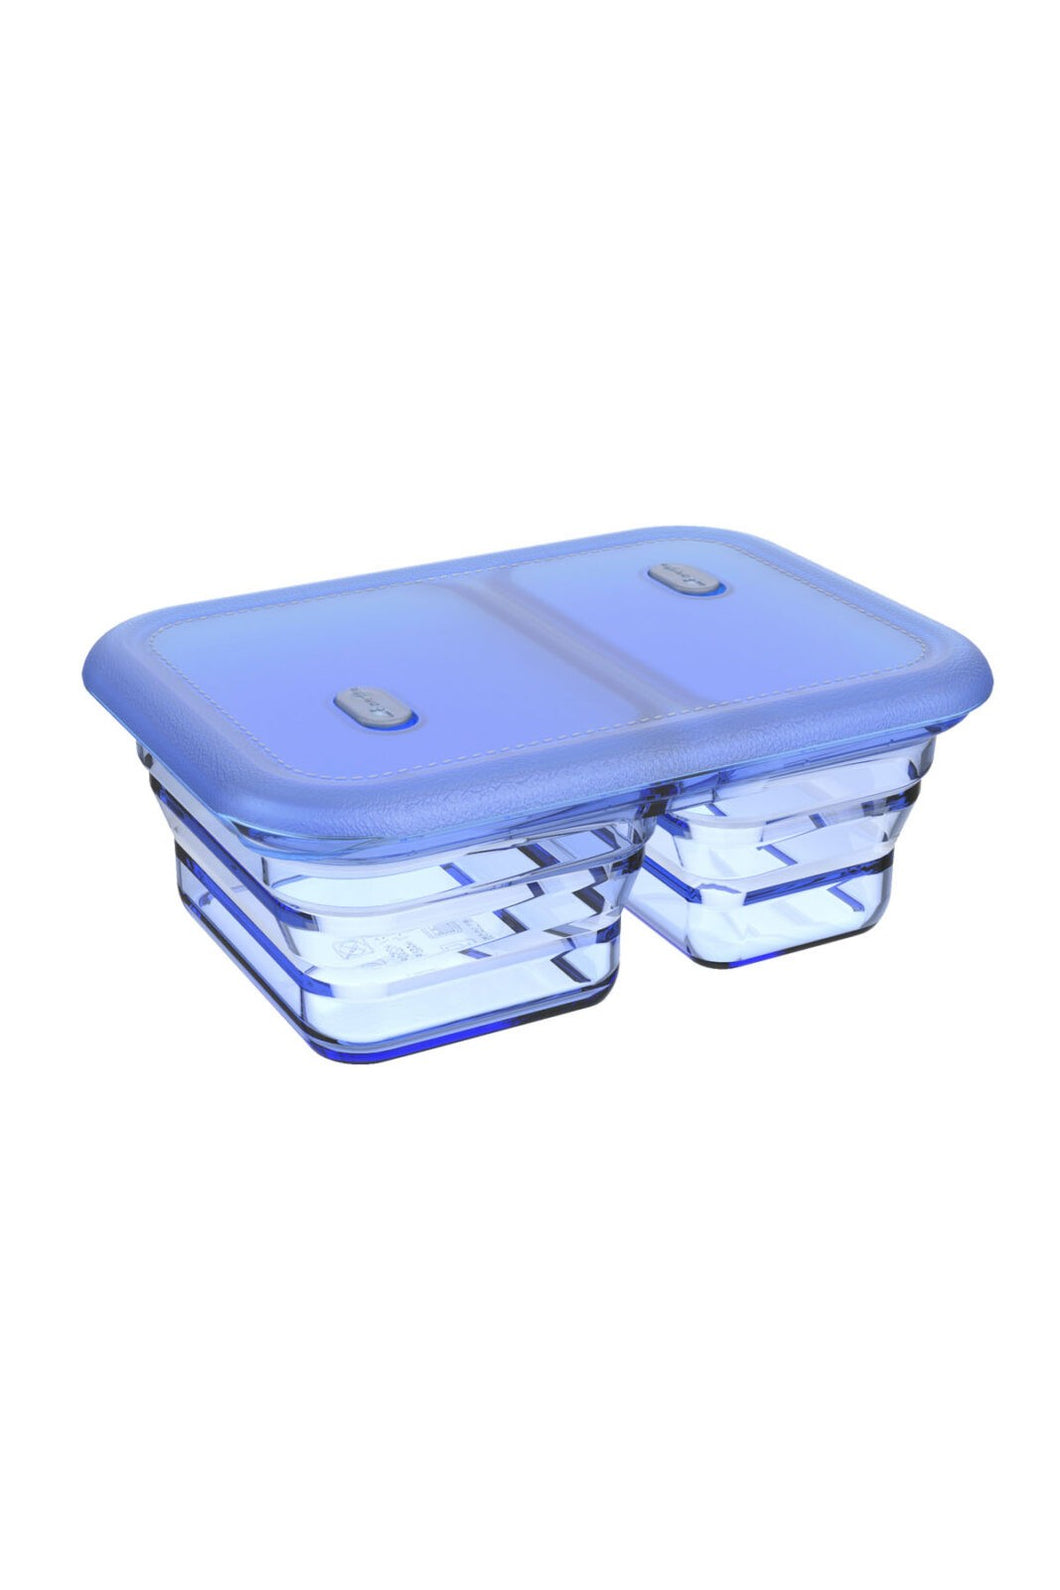 Minimal Collapsible Silicone Food Container - 2 Compartment